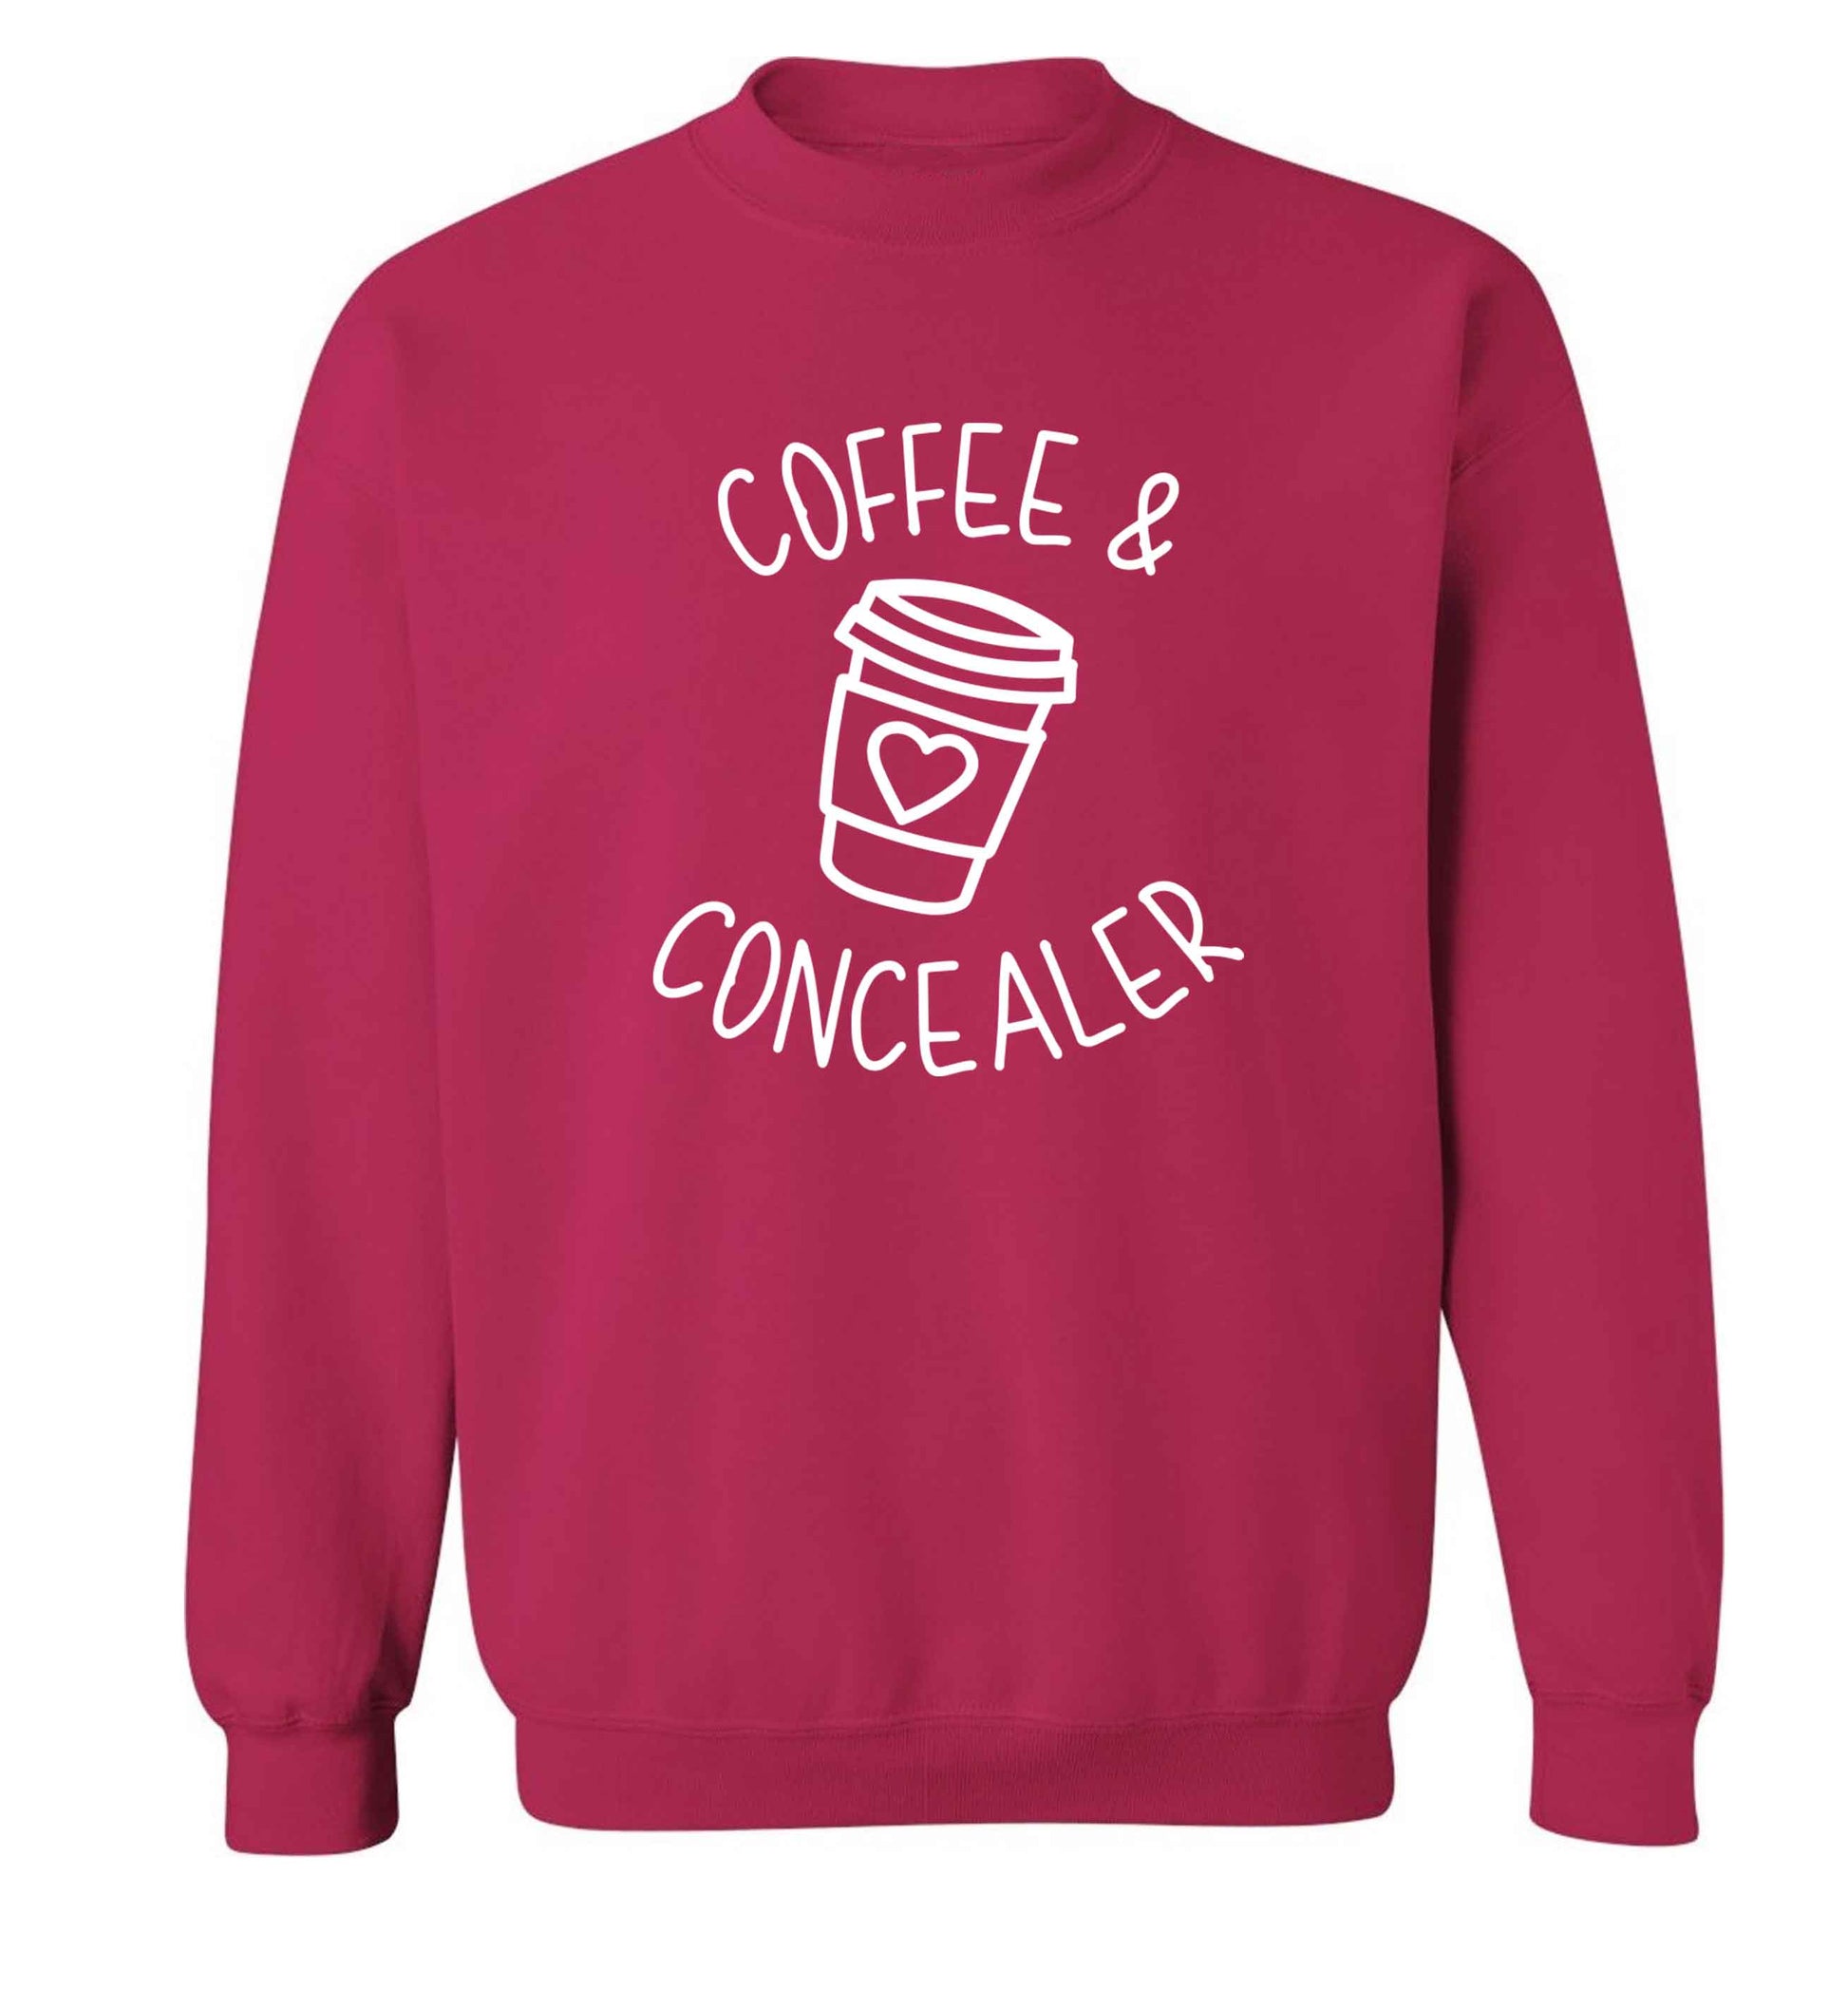 Coffee and concealer adult's unisex pink sweater 2XL